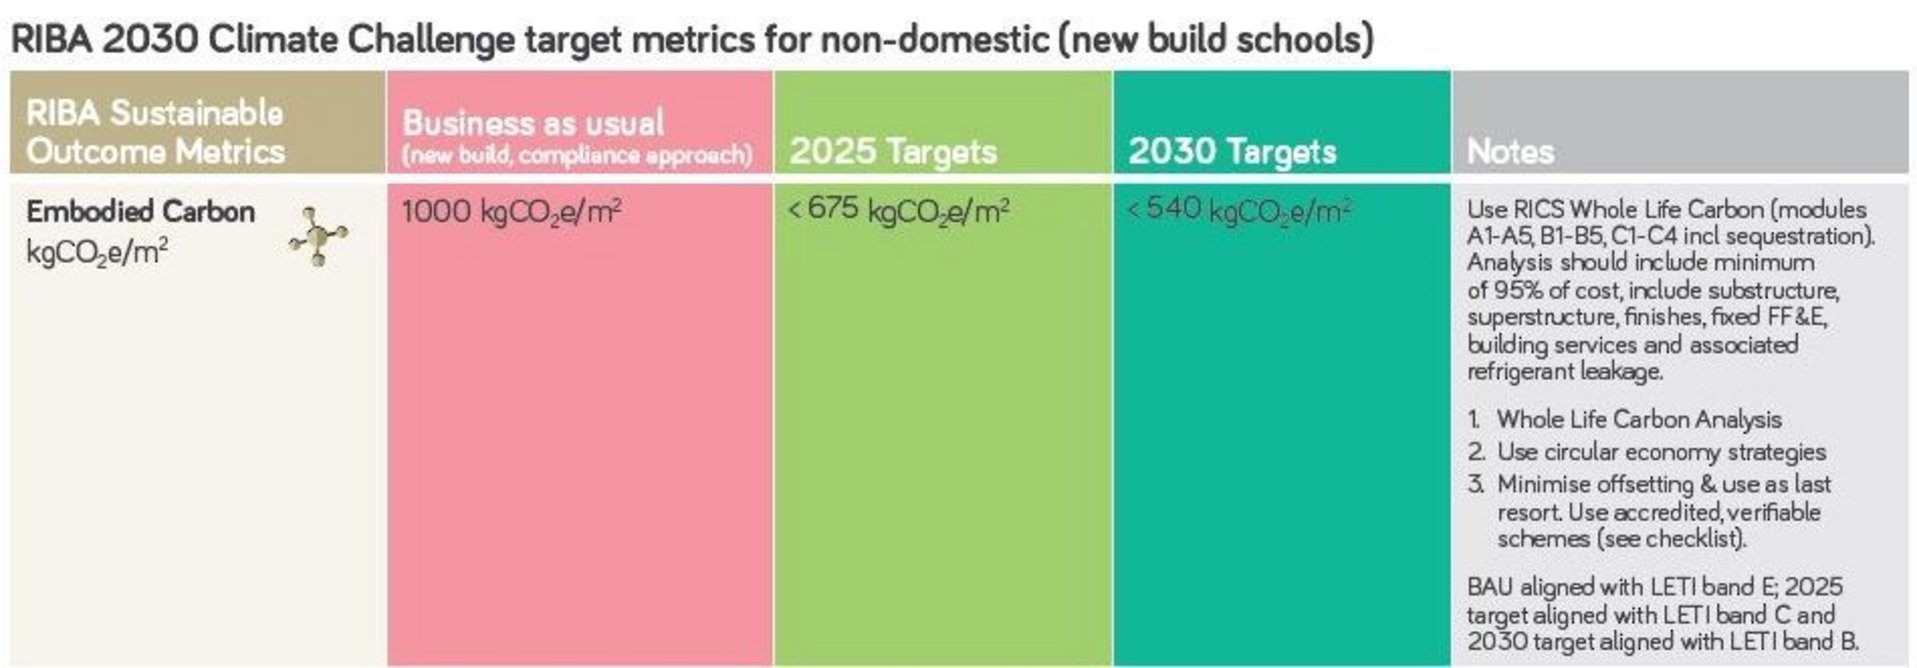 RIBA 2030 Embodied Carbon Targets for schools